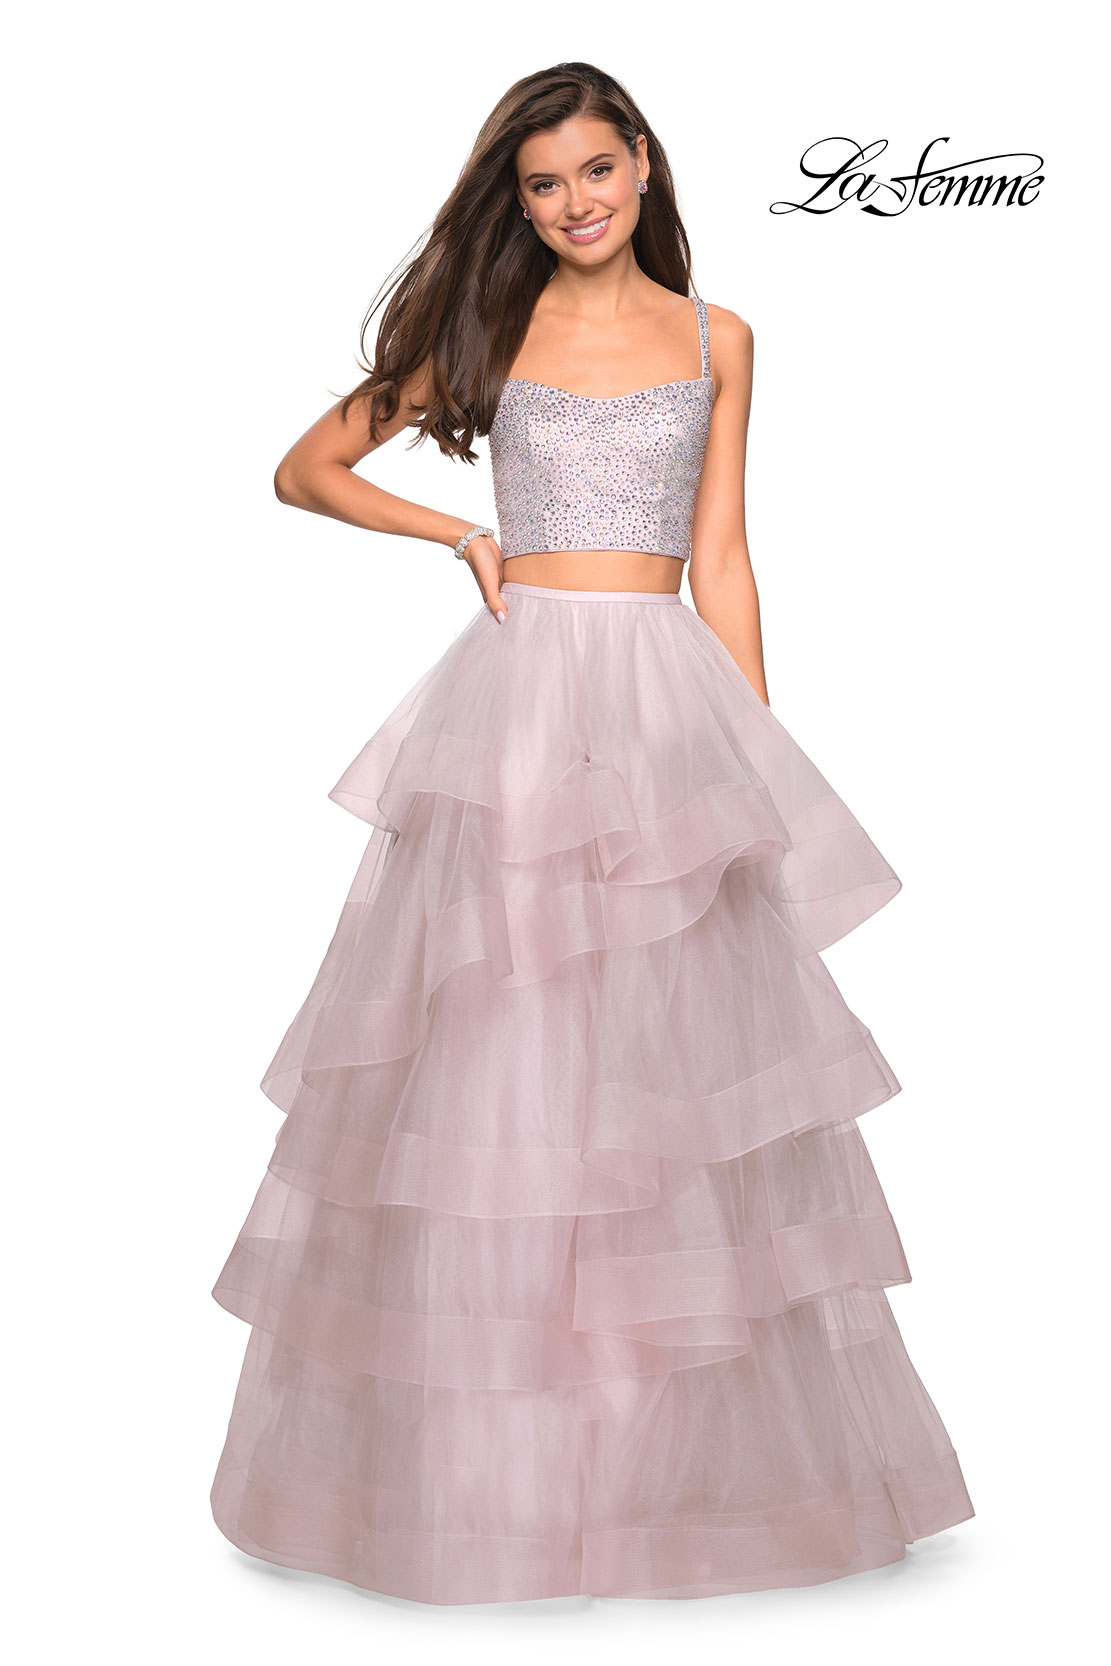 Tulle skirt mauve prom dress two piece with rhinestones